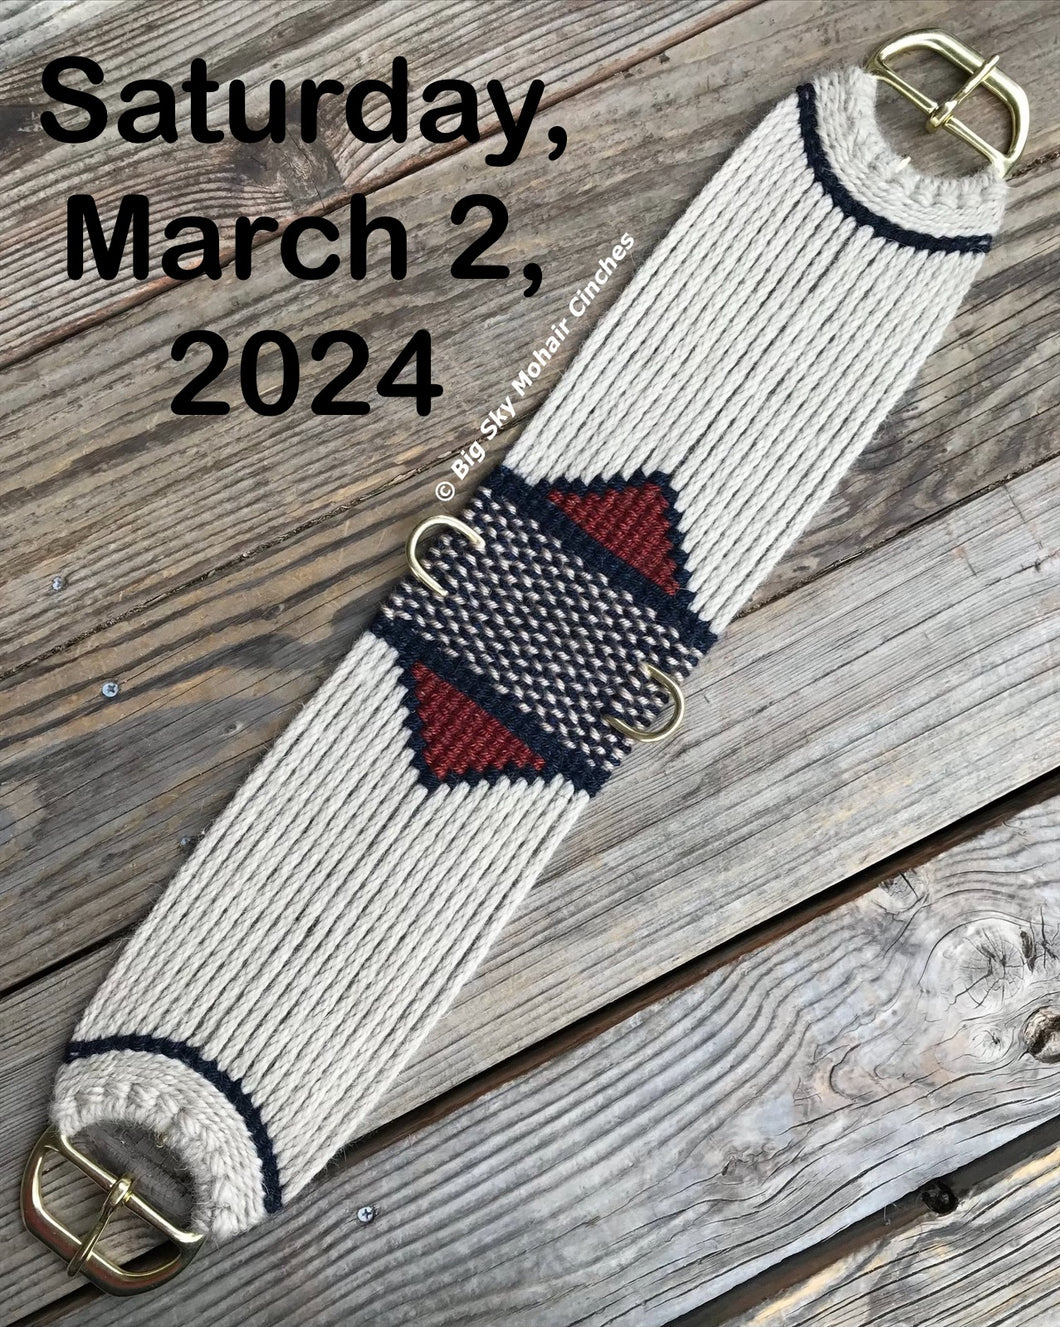 In-Person Cinch Making Class Registration- March 2, 2024